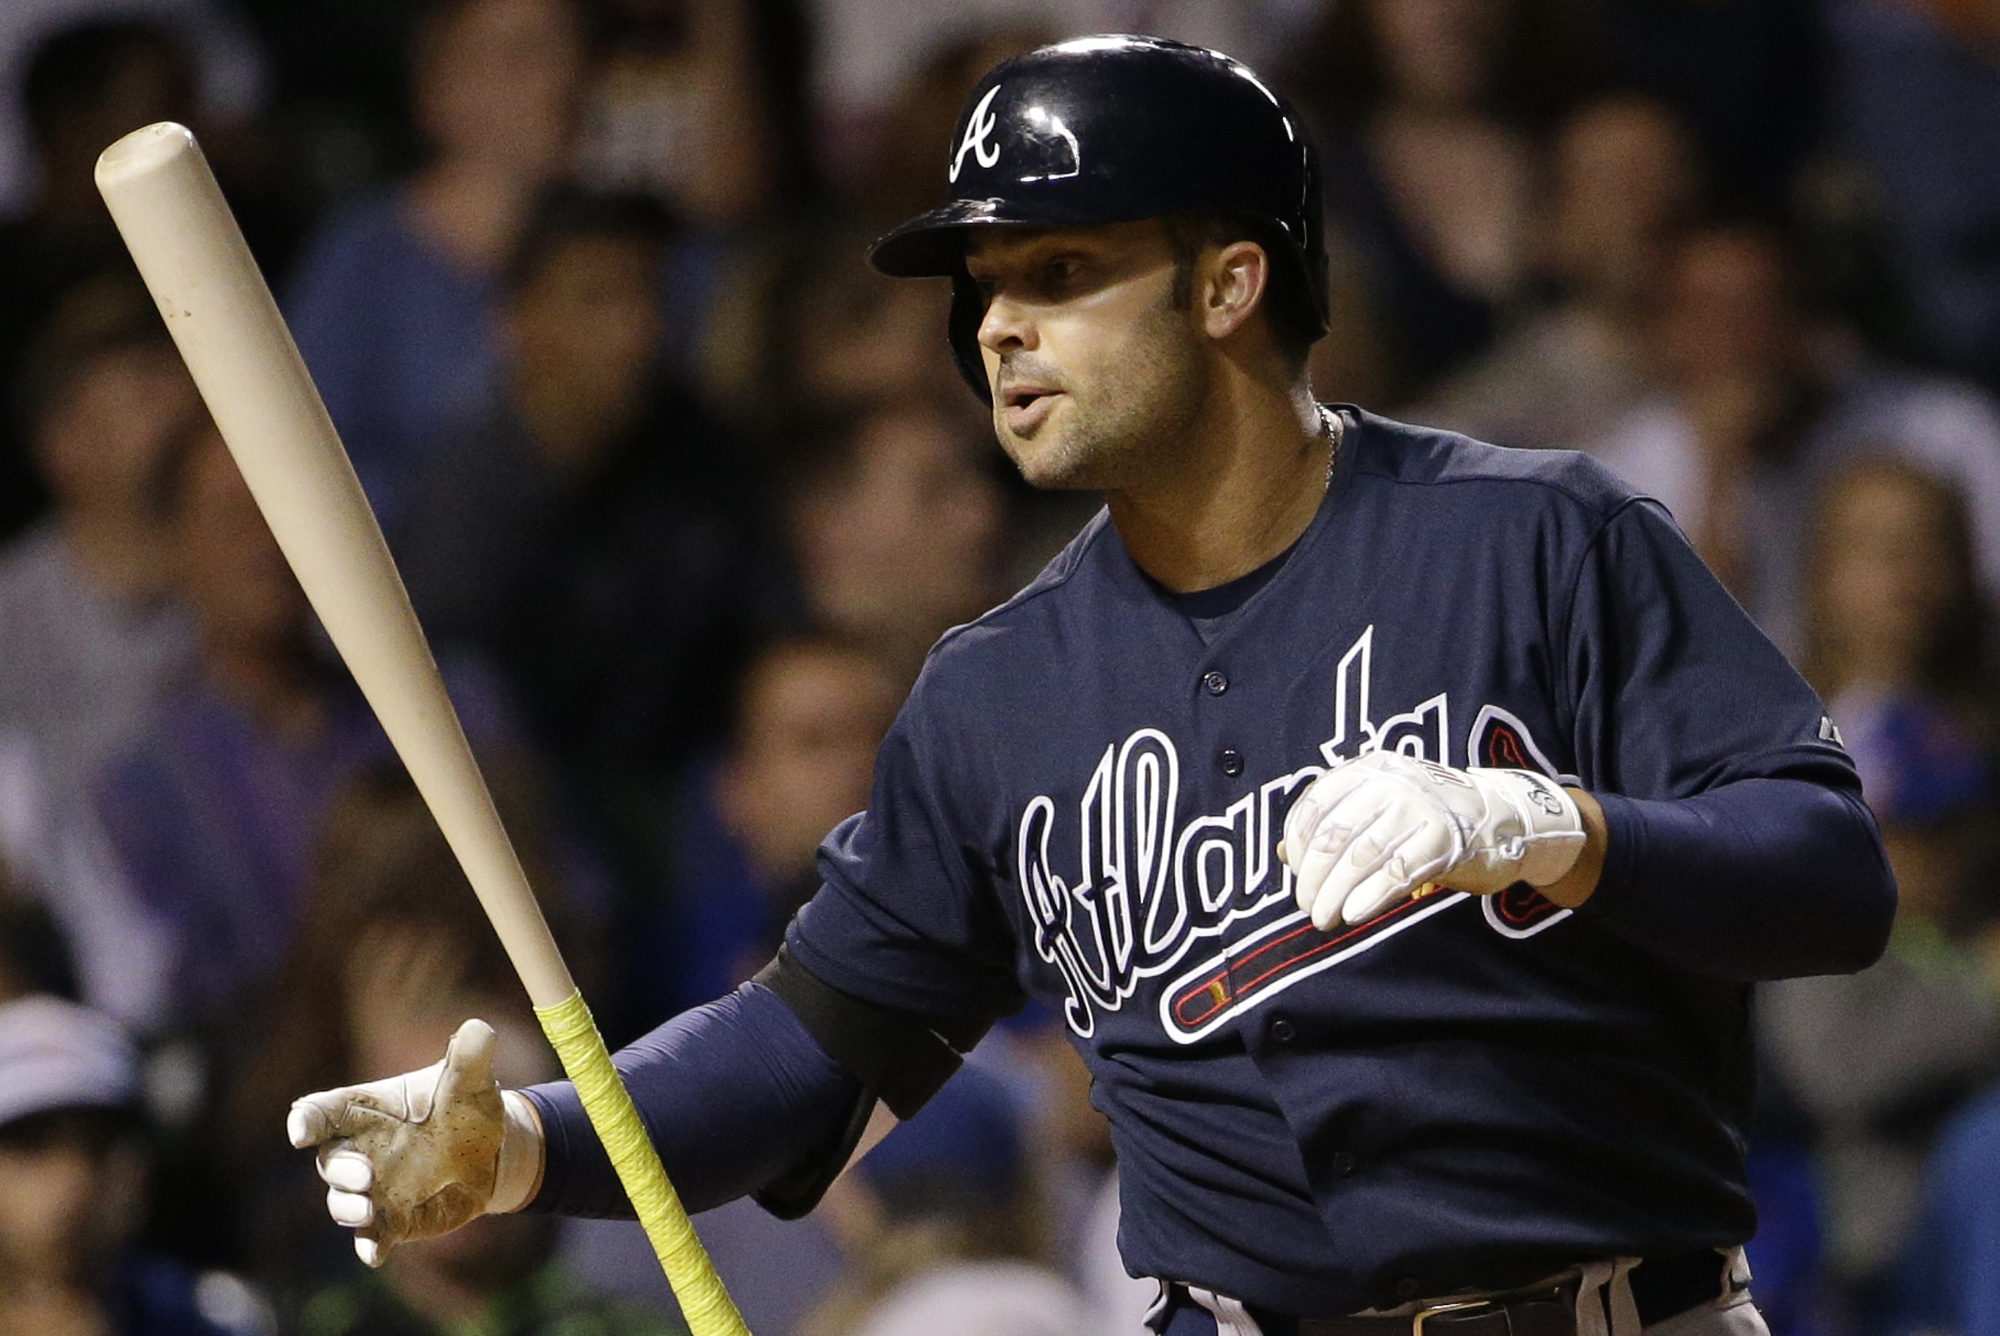 VIDEO: Nick Swisher Being Jacked up for Random Spring Training